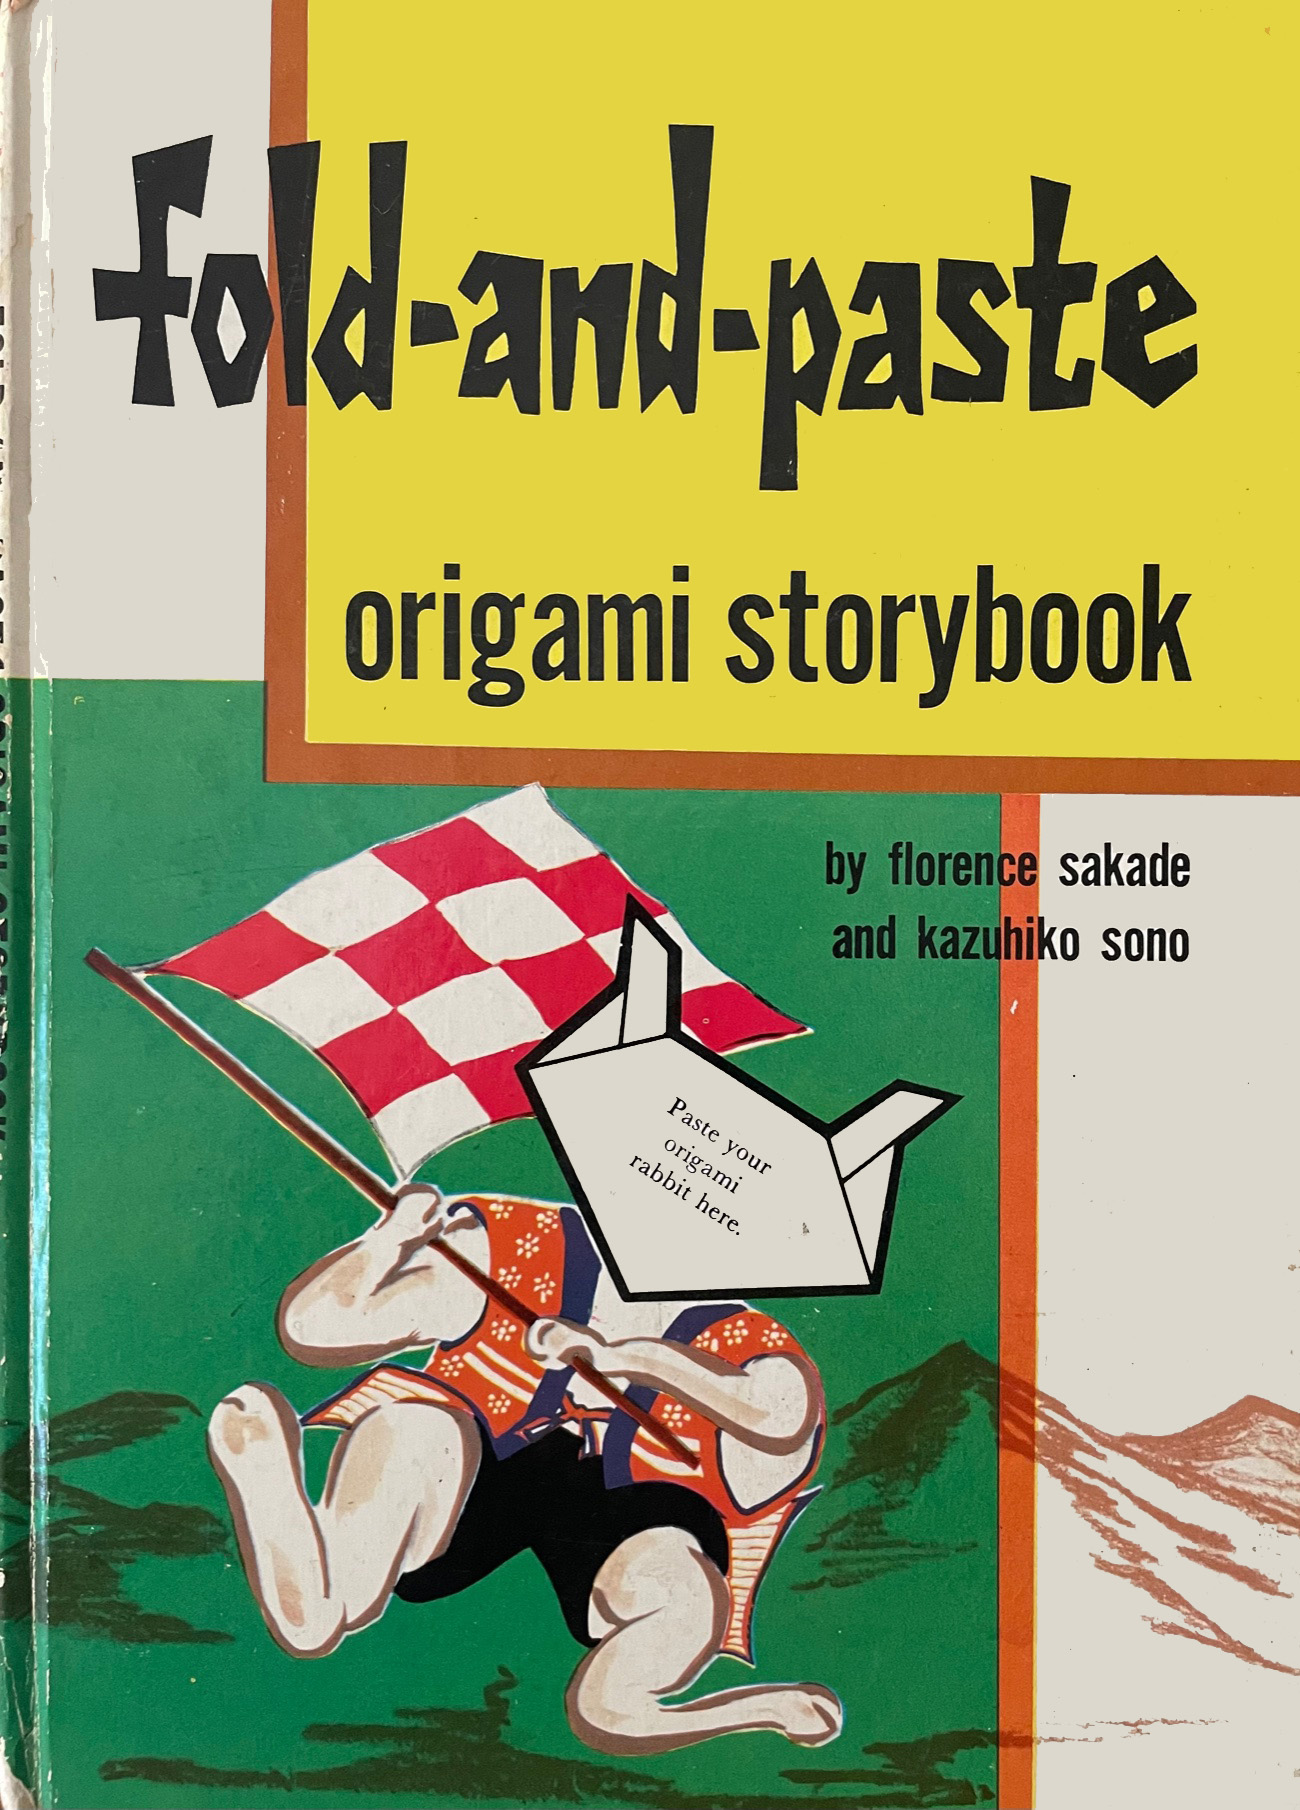 Fold-and-paste origami storybook